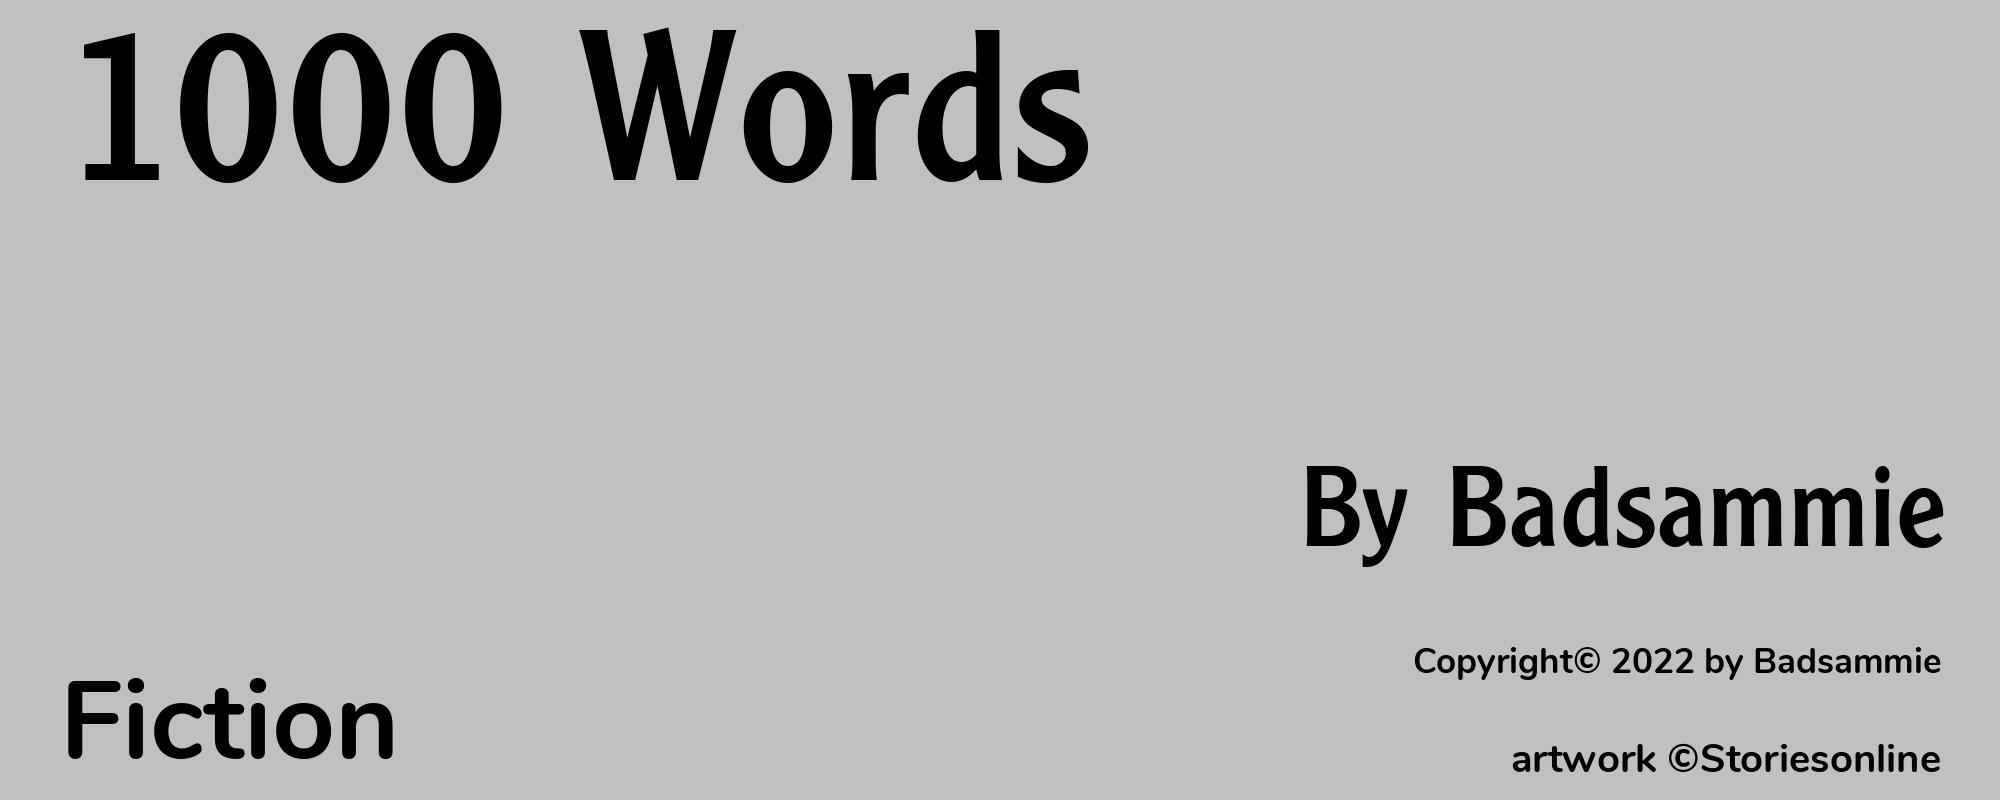 1000 Words - Cover